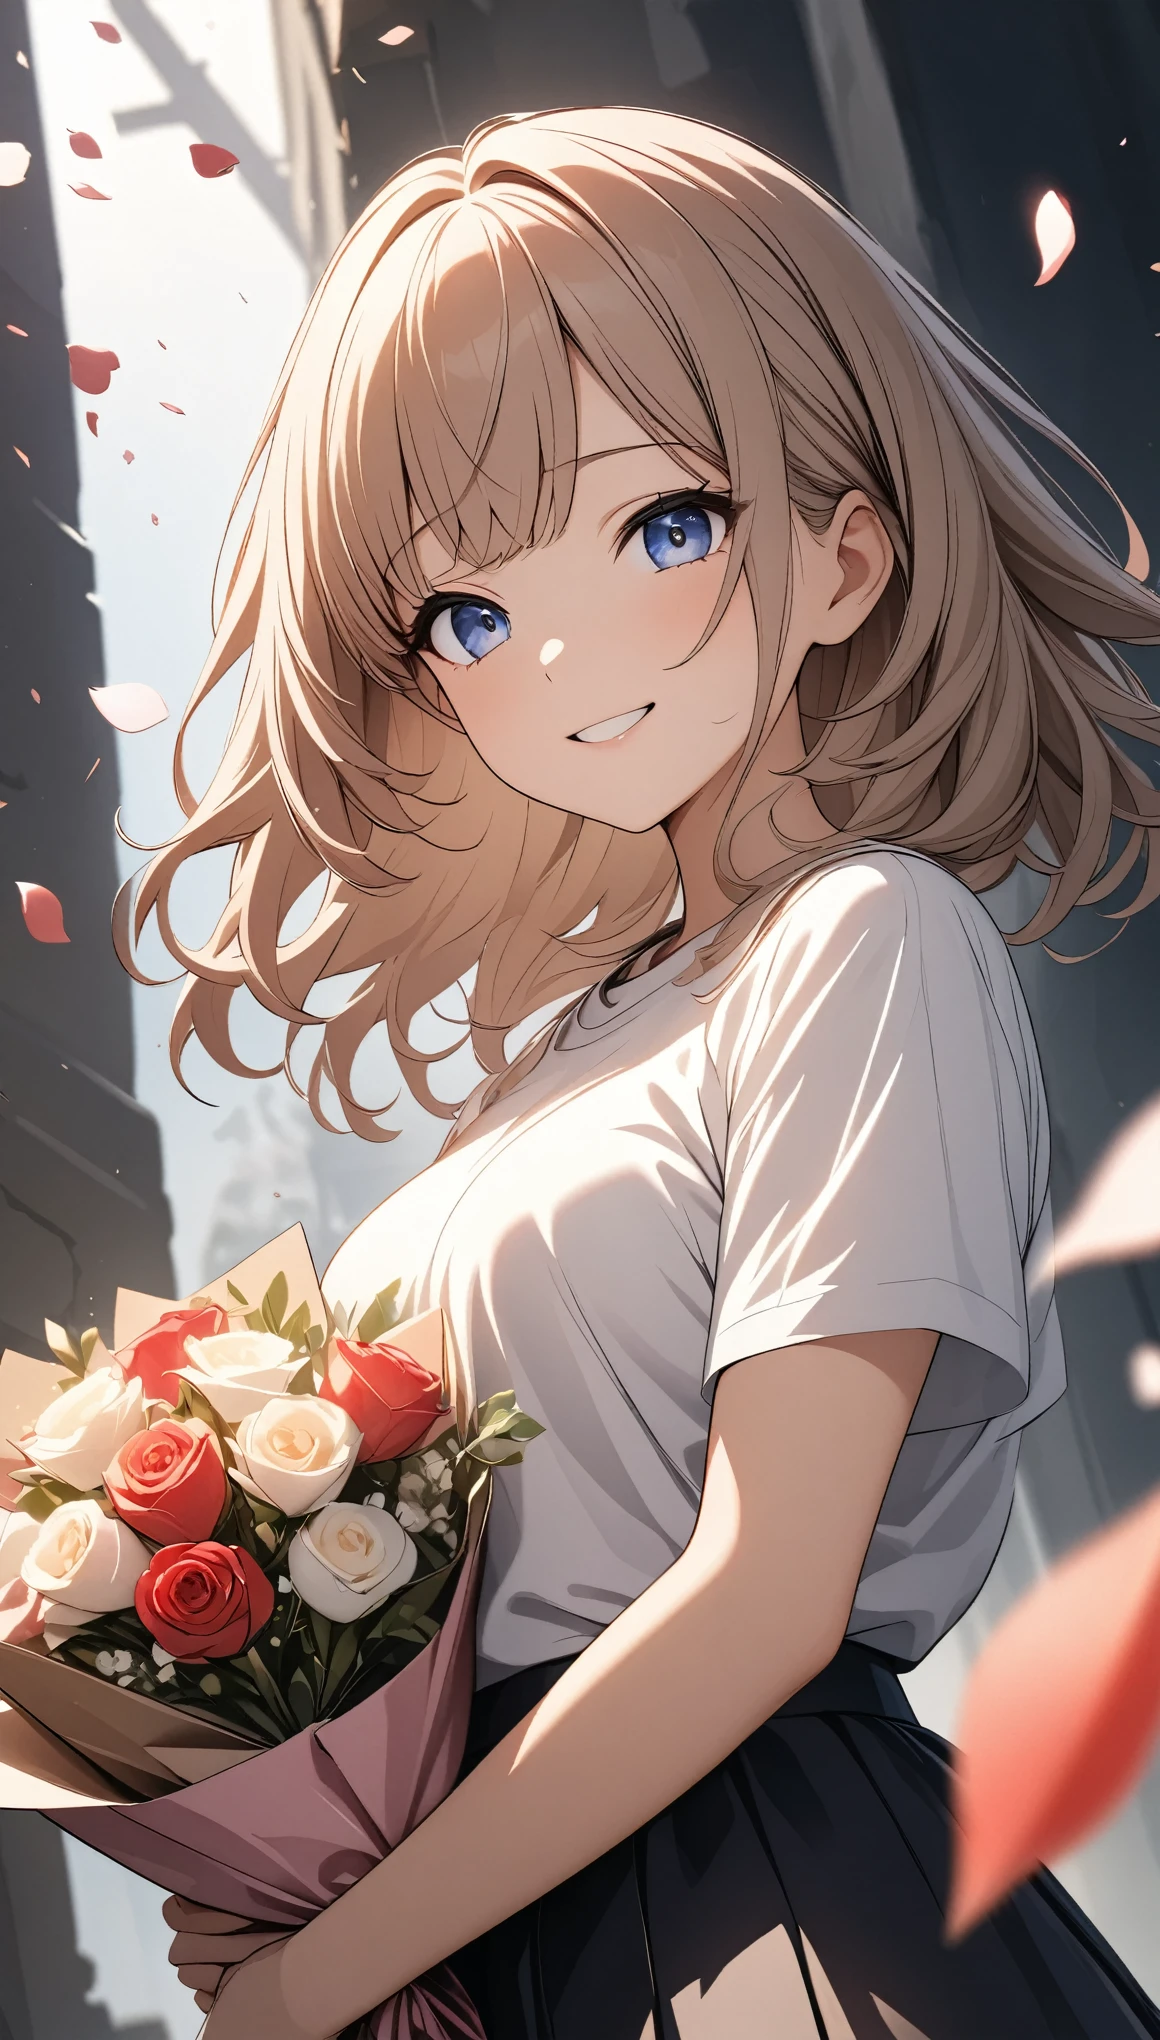 Middle view, Medium shot, Shallow depth of field, Broken into pieces, Upper Body, angle, masterpiece, best quality, Super detailed, CG, 8k wallpaper, Pretty Face, Exquisite eyes, A girl, Solitary, Smile, Bangs, shirt, skirt, petal, bouquet